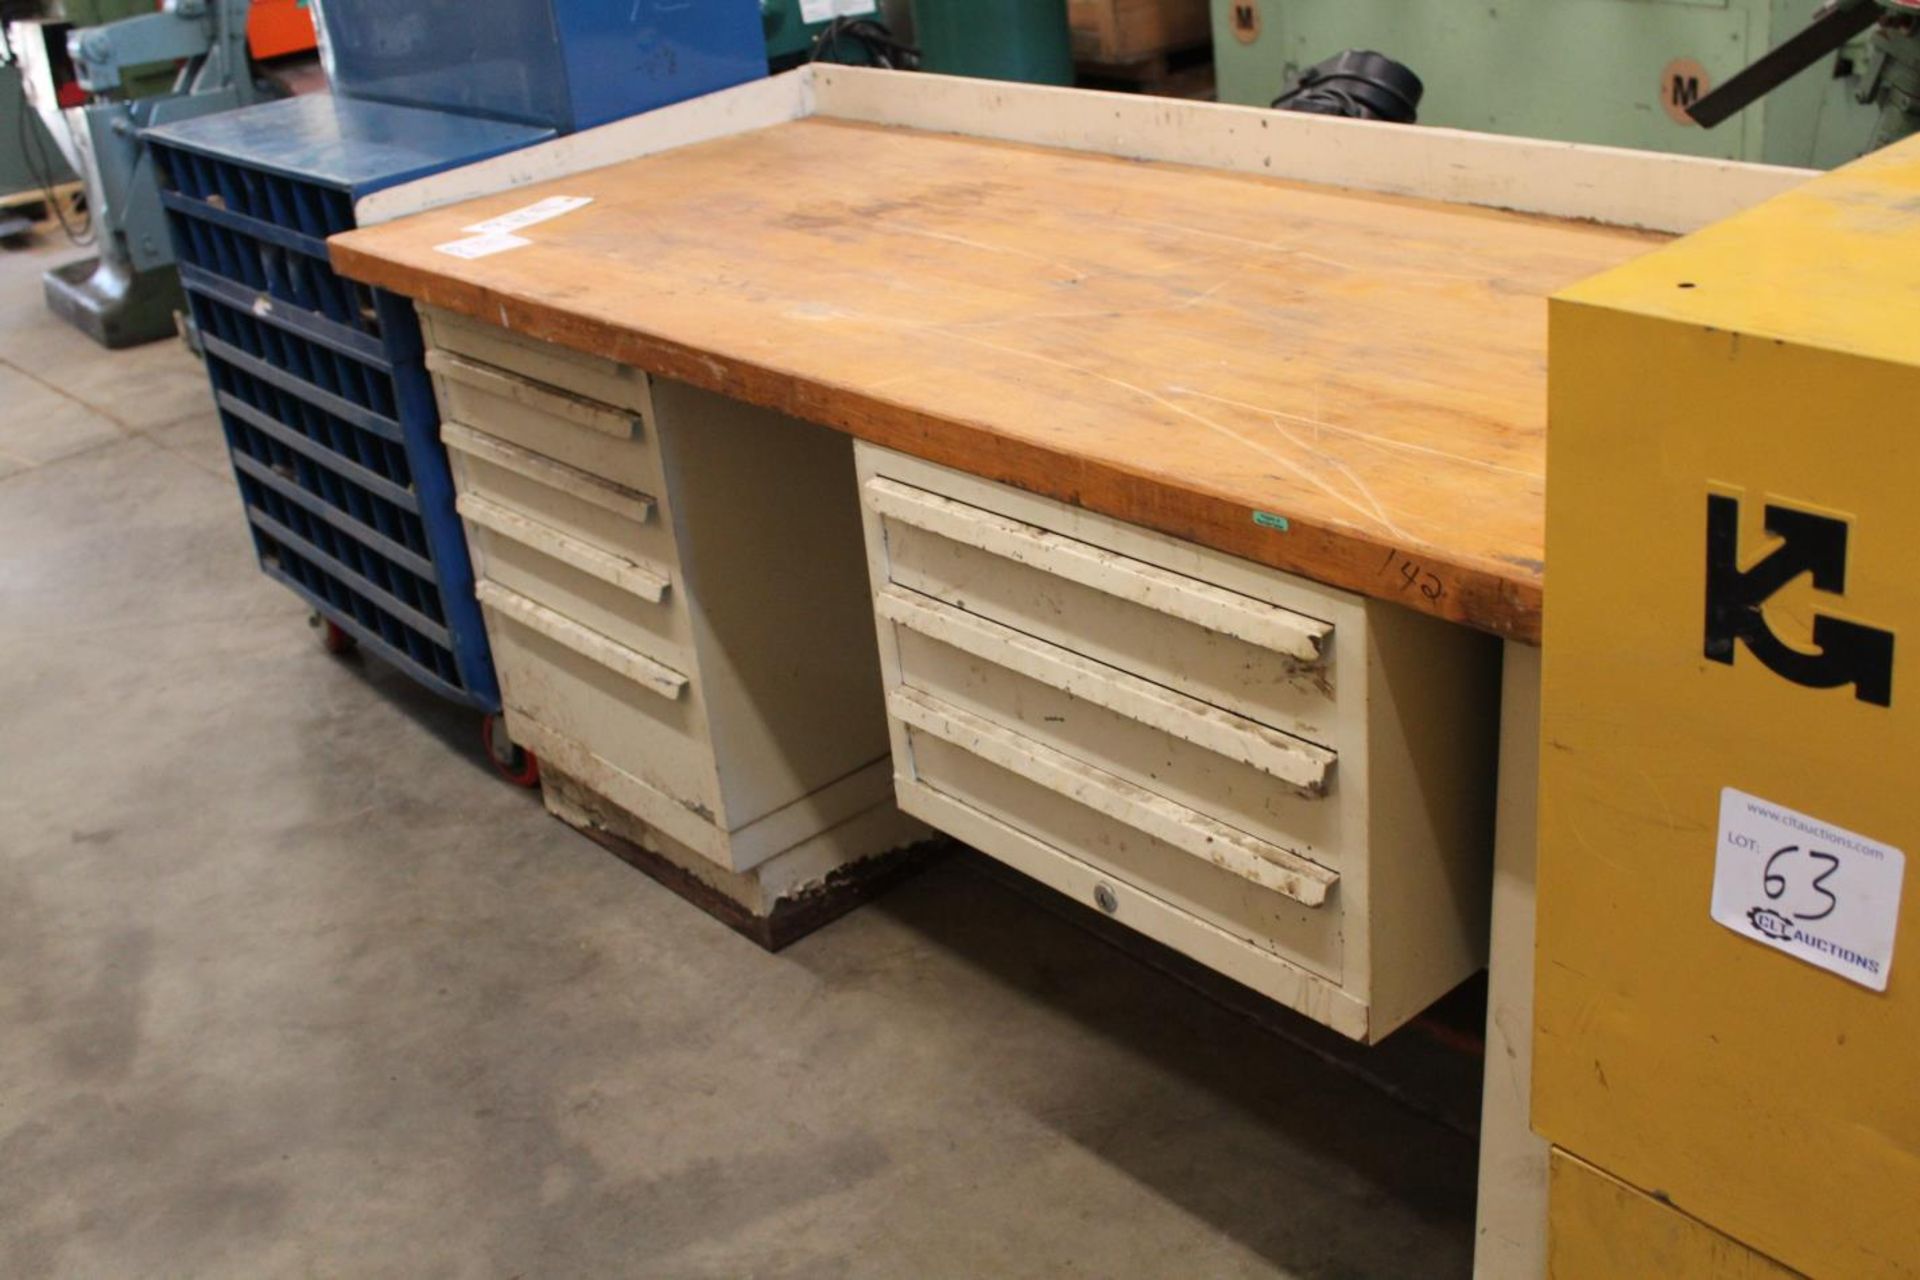 Butcher Block Top Work Bench W/ Tooling Cabinets 72" x 30" x 35"H - Image 2 of 4